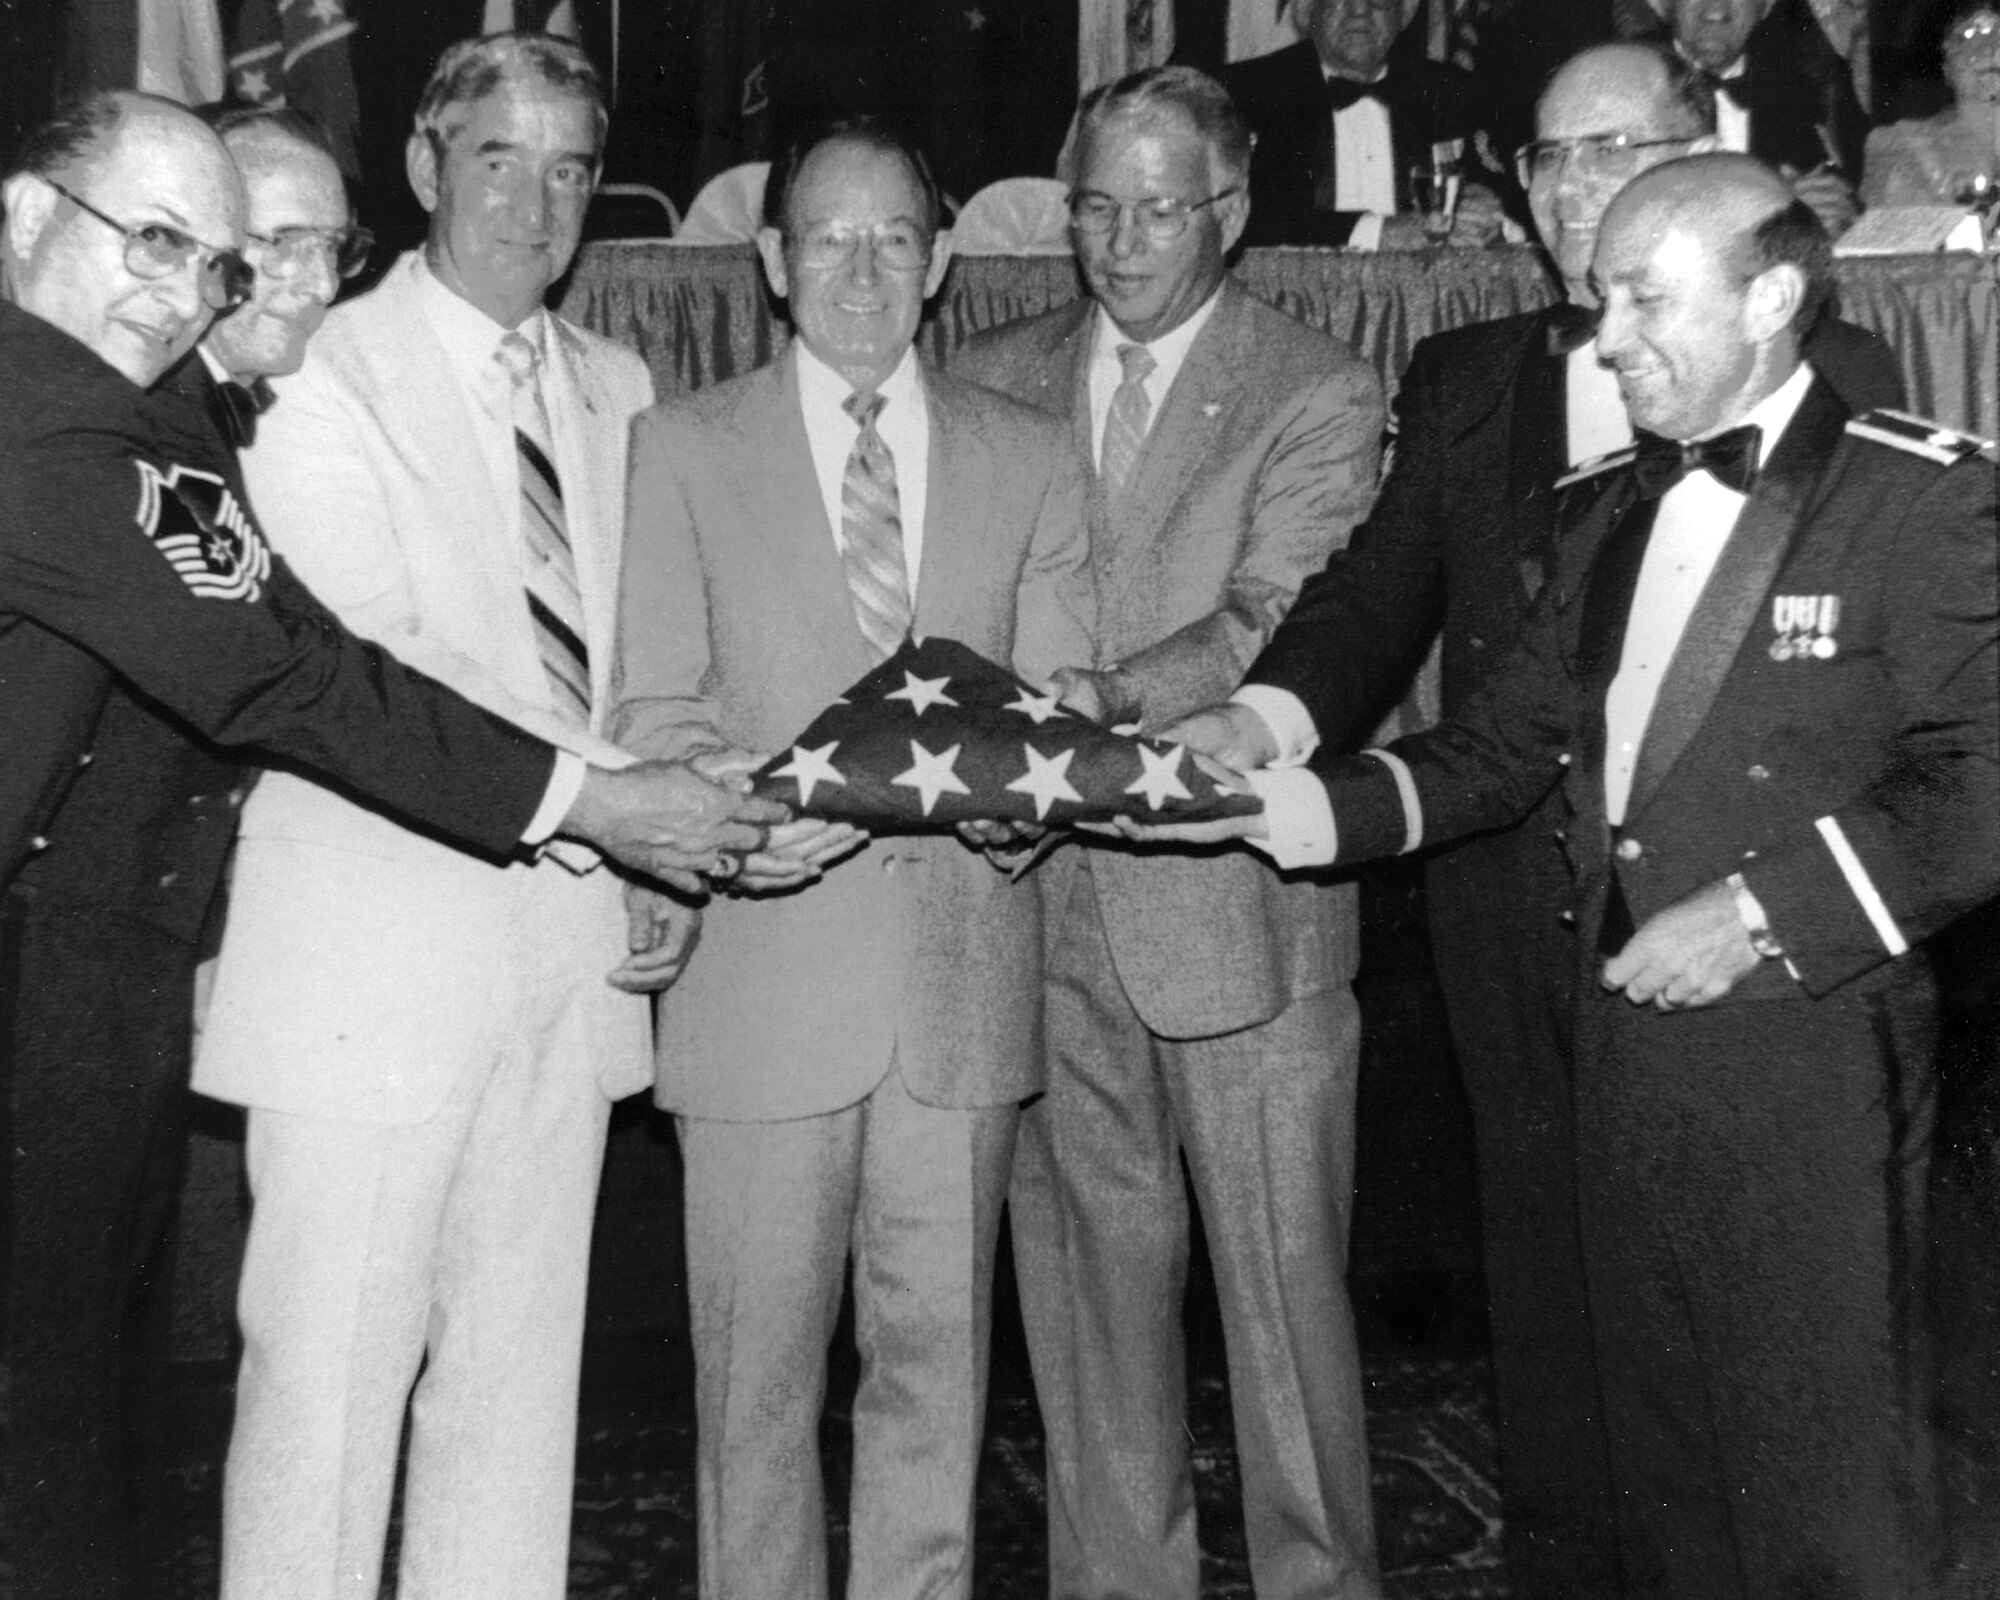 From left, Chief Master Sgt. Myron Pigg, Senior Master Sgt. Jimmie Stewart, Chief Master Sgt. Jim Laux, Chief Master Sgt. Paul Lankford, Col. Edmund Morrisey, Chief Master Sgt. Gordon Kniskern, and Col. Larry Martin commemorate the return of the American flag, July 24, 1986, at the I.G. Brown Training and Education Center in Louisville, Tenn., nearly 16 years to the month after it was sent out by NCO academy class 71-1 to fly over every state and territory of the United States. The flag was last flown July 29, 1986, at the first reveille of NCO academy class 86-3. Thousands of Airmen have seen the flag on display in Spruance Hall during the 30 years since. (U.S. Air National Guard file photo/released)  